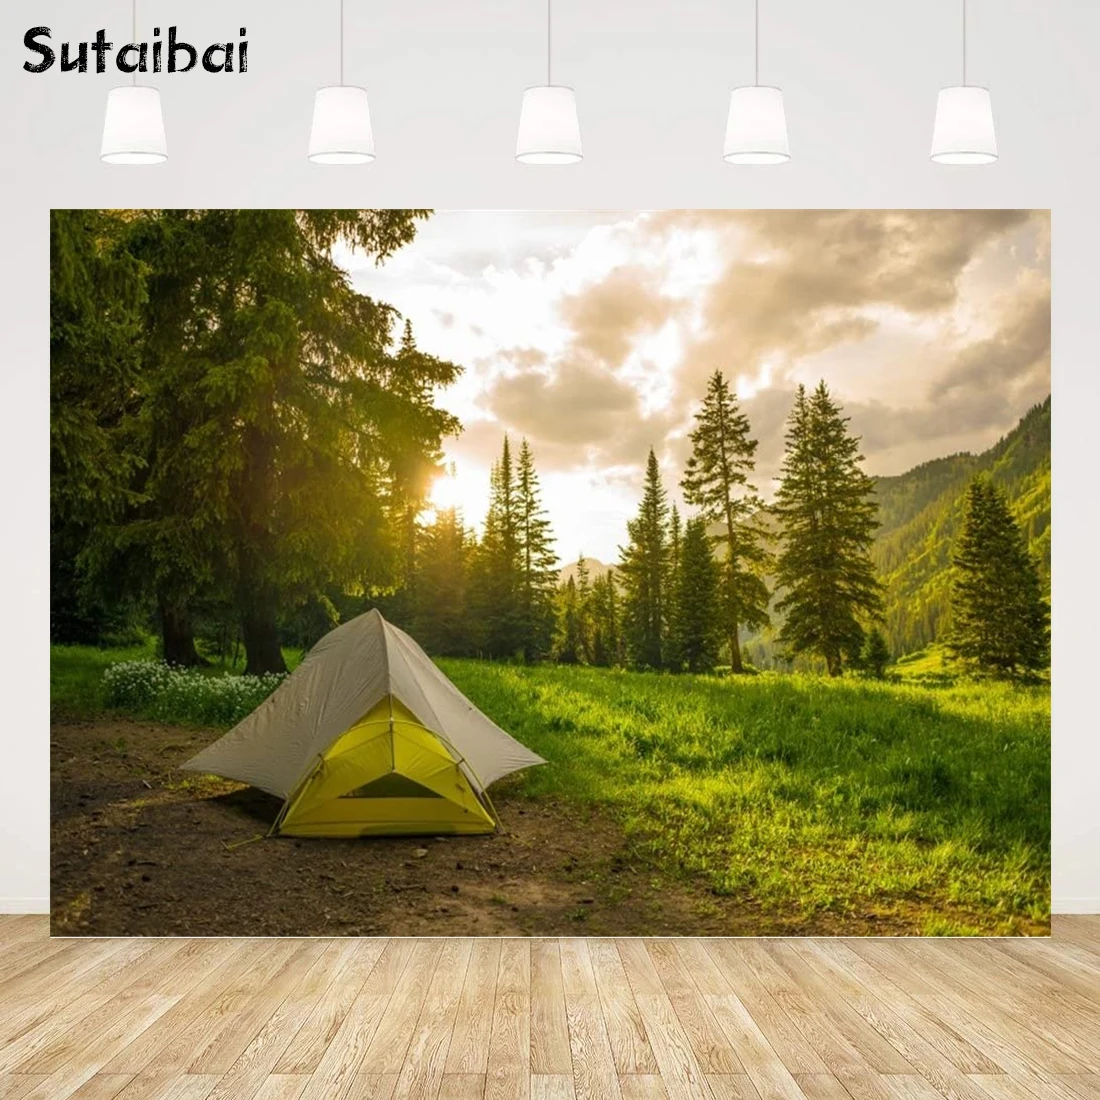 

Pine Forest Camping Backdrop for Photoshoot Sunrise Outdoor Travel Mountains Landscape Grassland Camp Tents Photography Backdrop